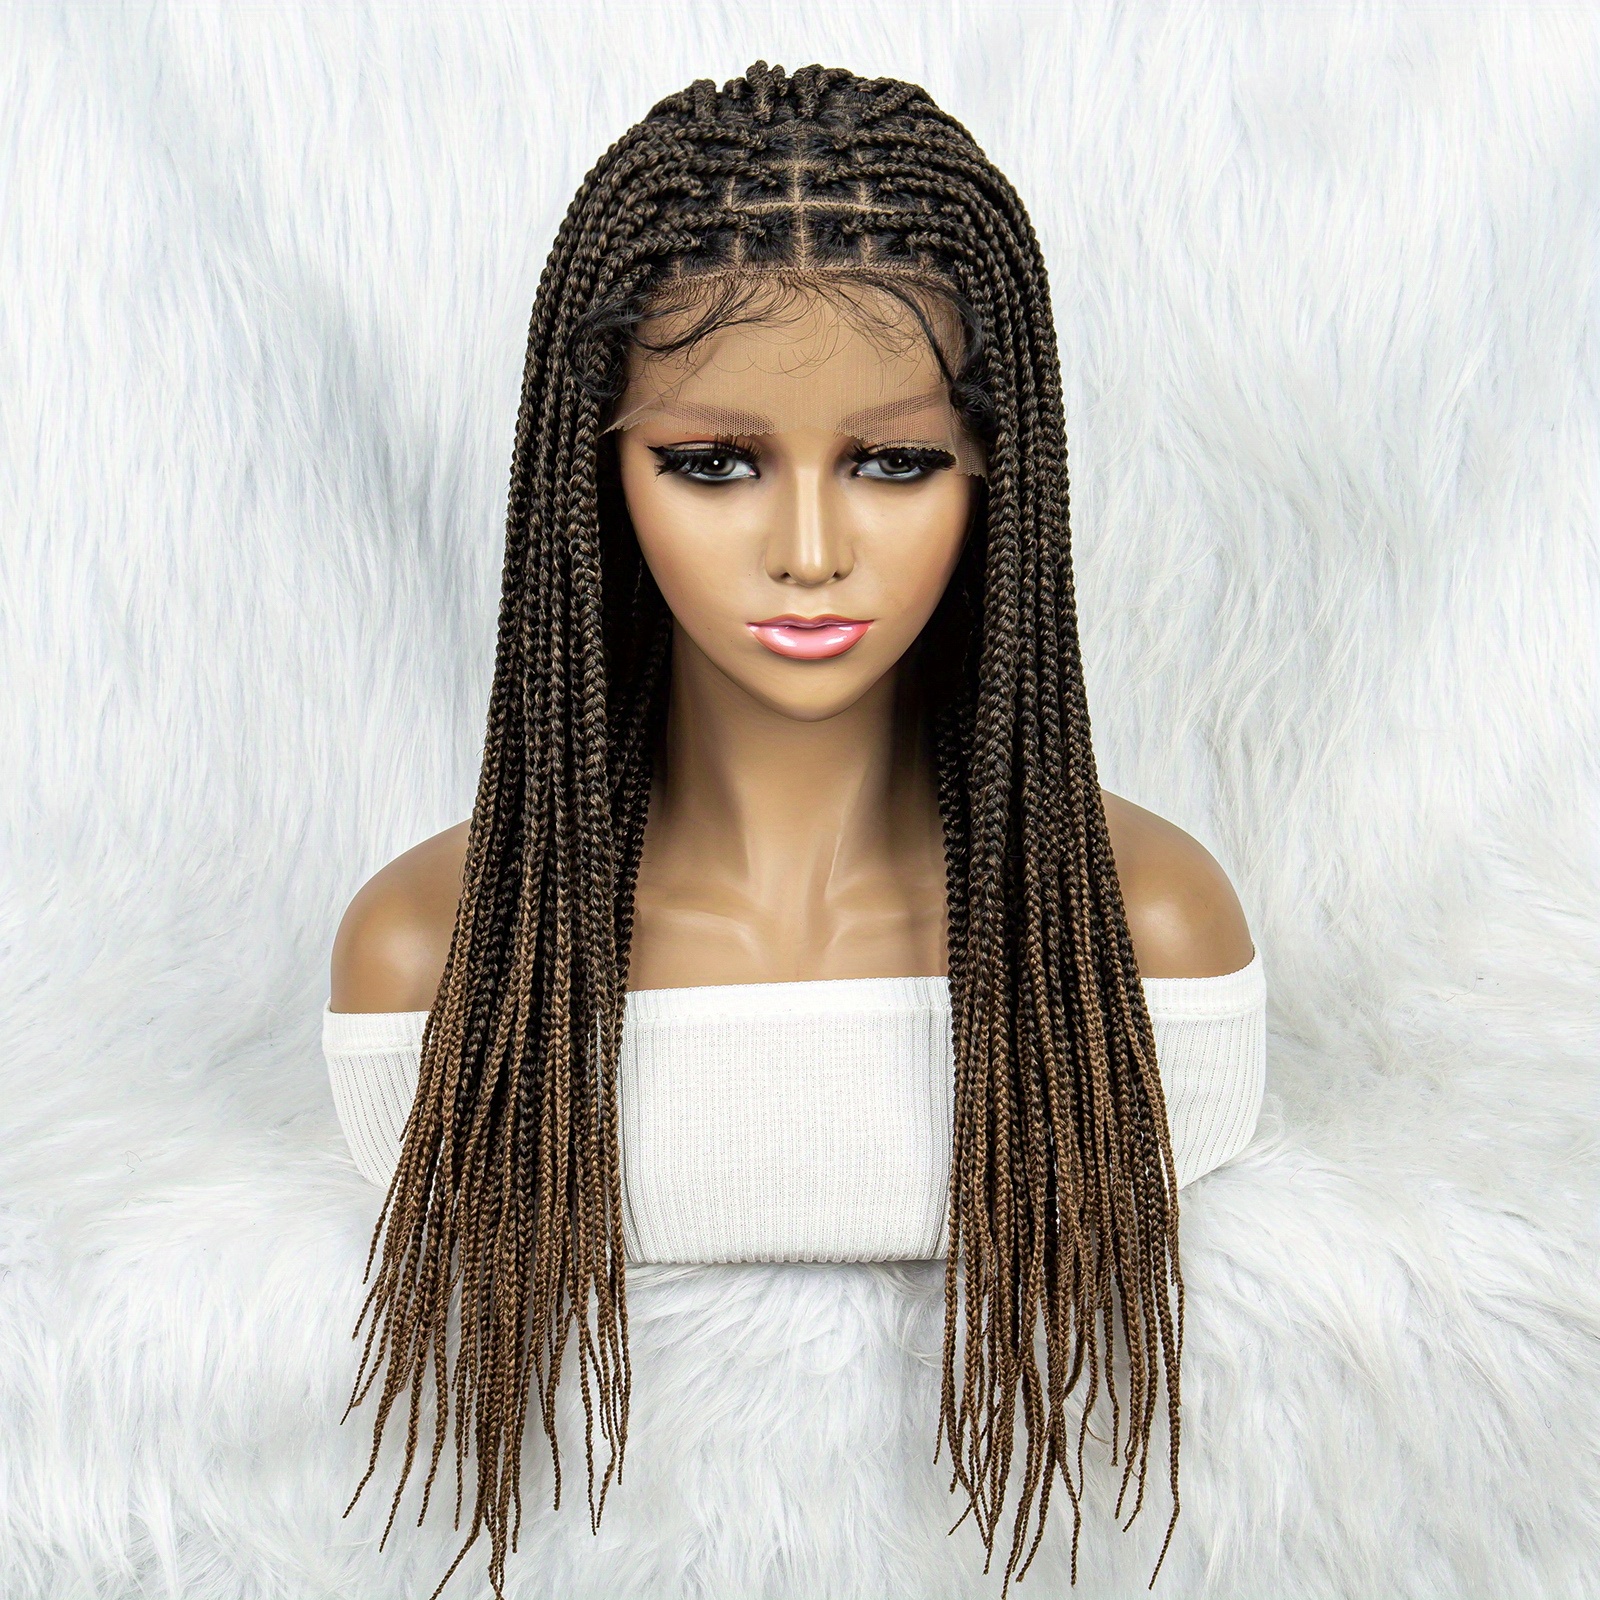 Full Lace Front Knotless Box Braided Wigs With Baby Hair, Super Long  Synthetic Braids for Women 